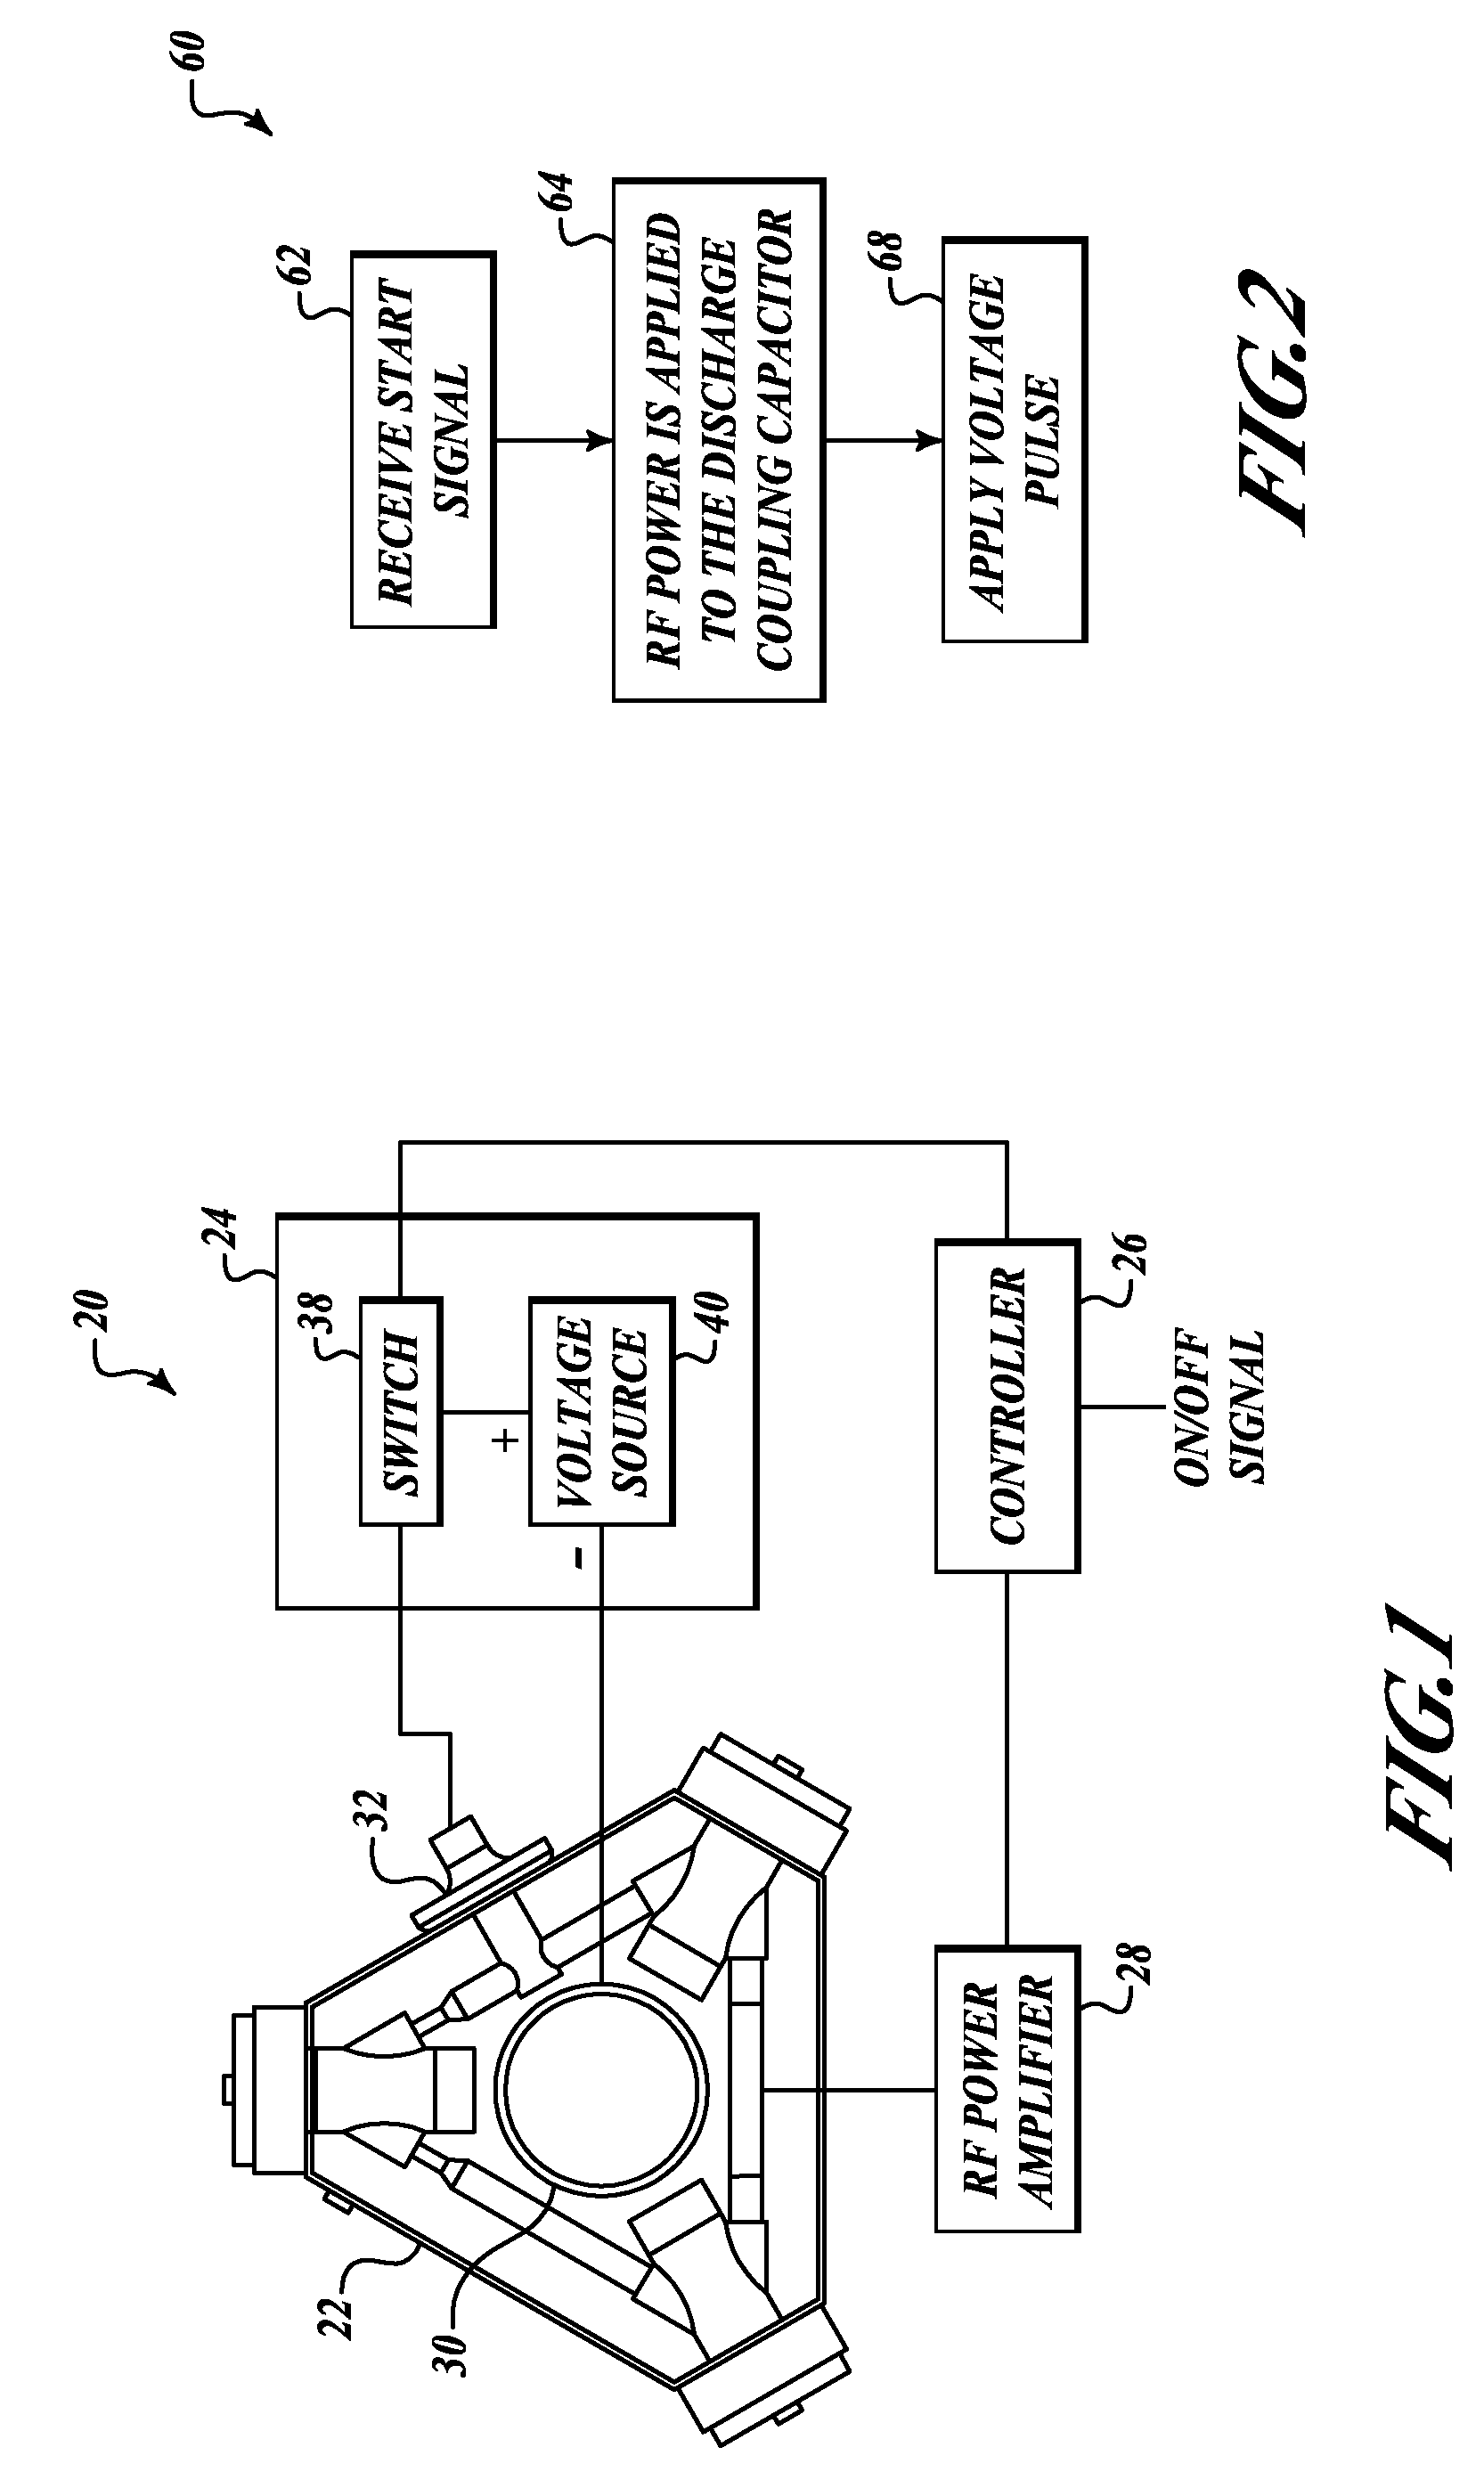 Systems and methods for assisting start of electrodeless RF discharge in a ring laser gyro